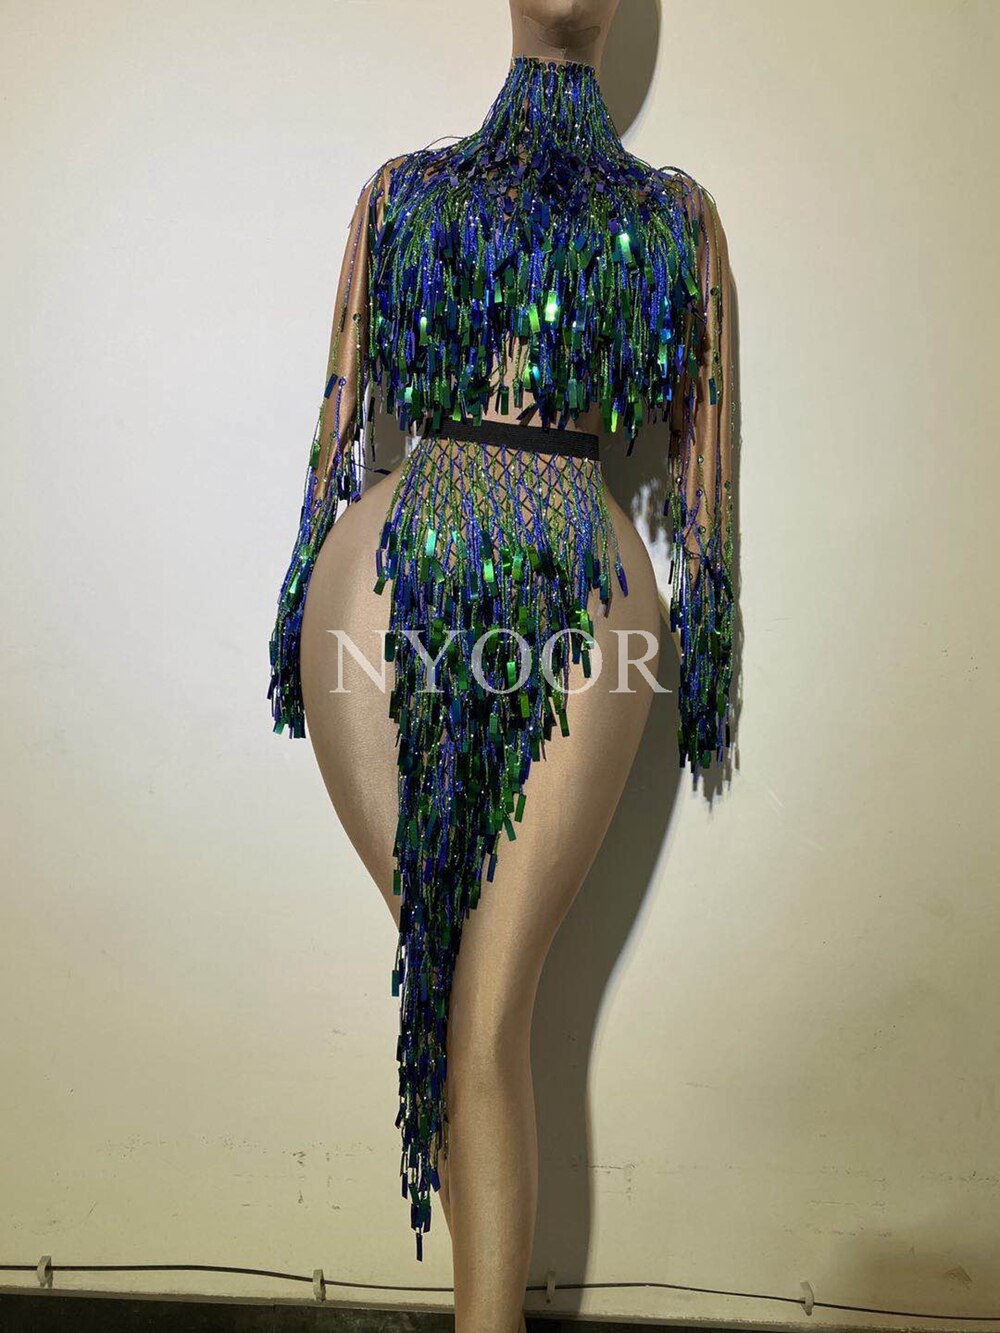 Flashing Silver Sequins Fringe Split Dress Women Nightclub Dance Costume Performance Stage Show Clothes Birthday Rave Outfit